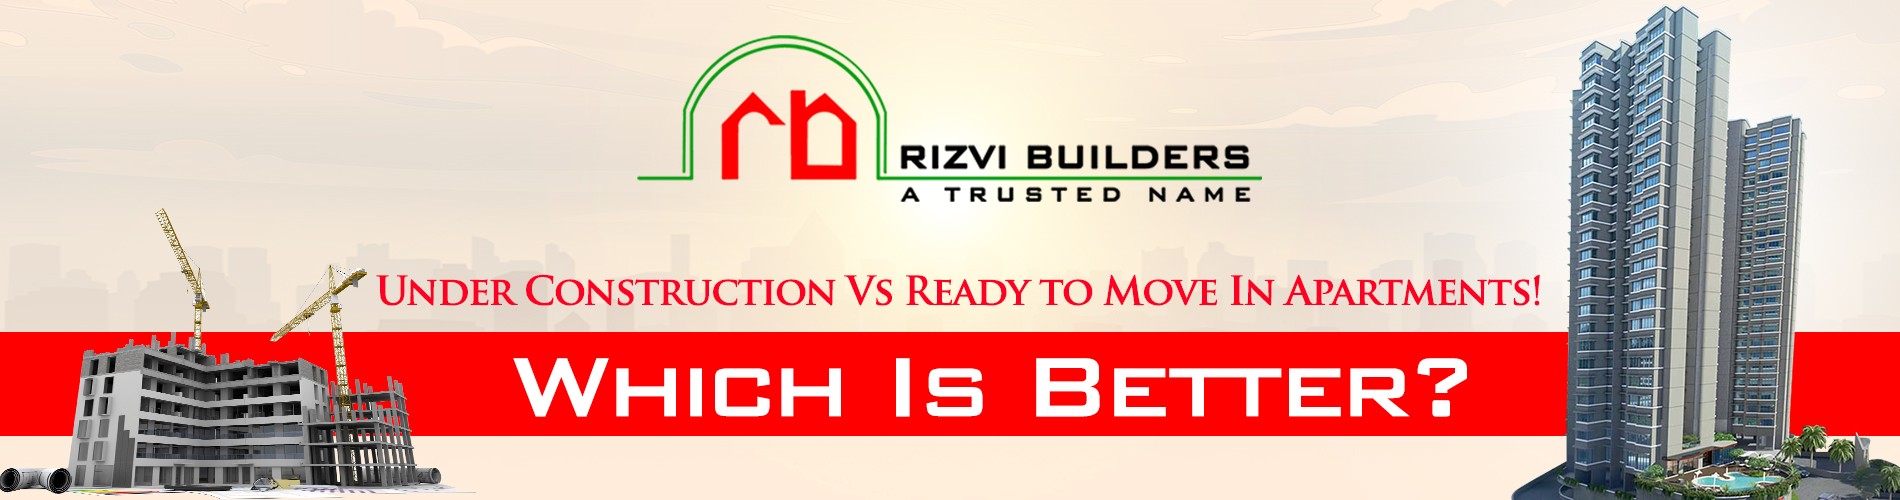 Under construction Vs Ready to move in property: Which one is better?